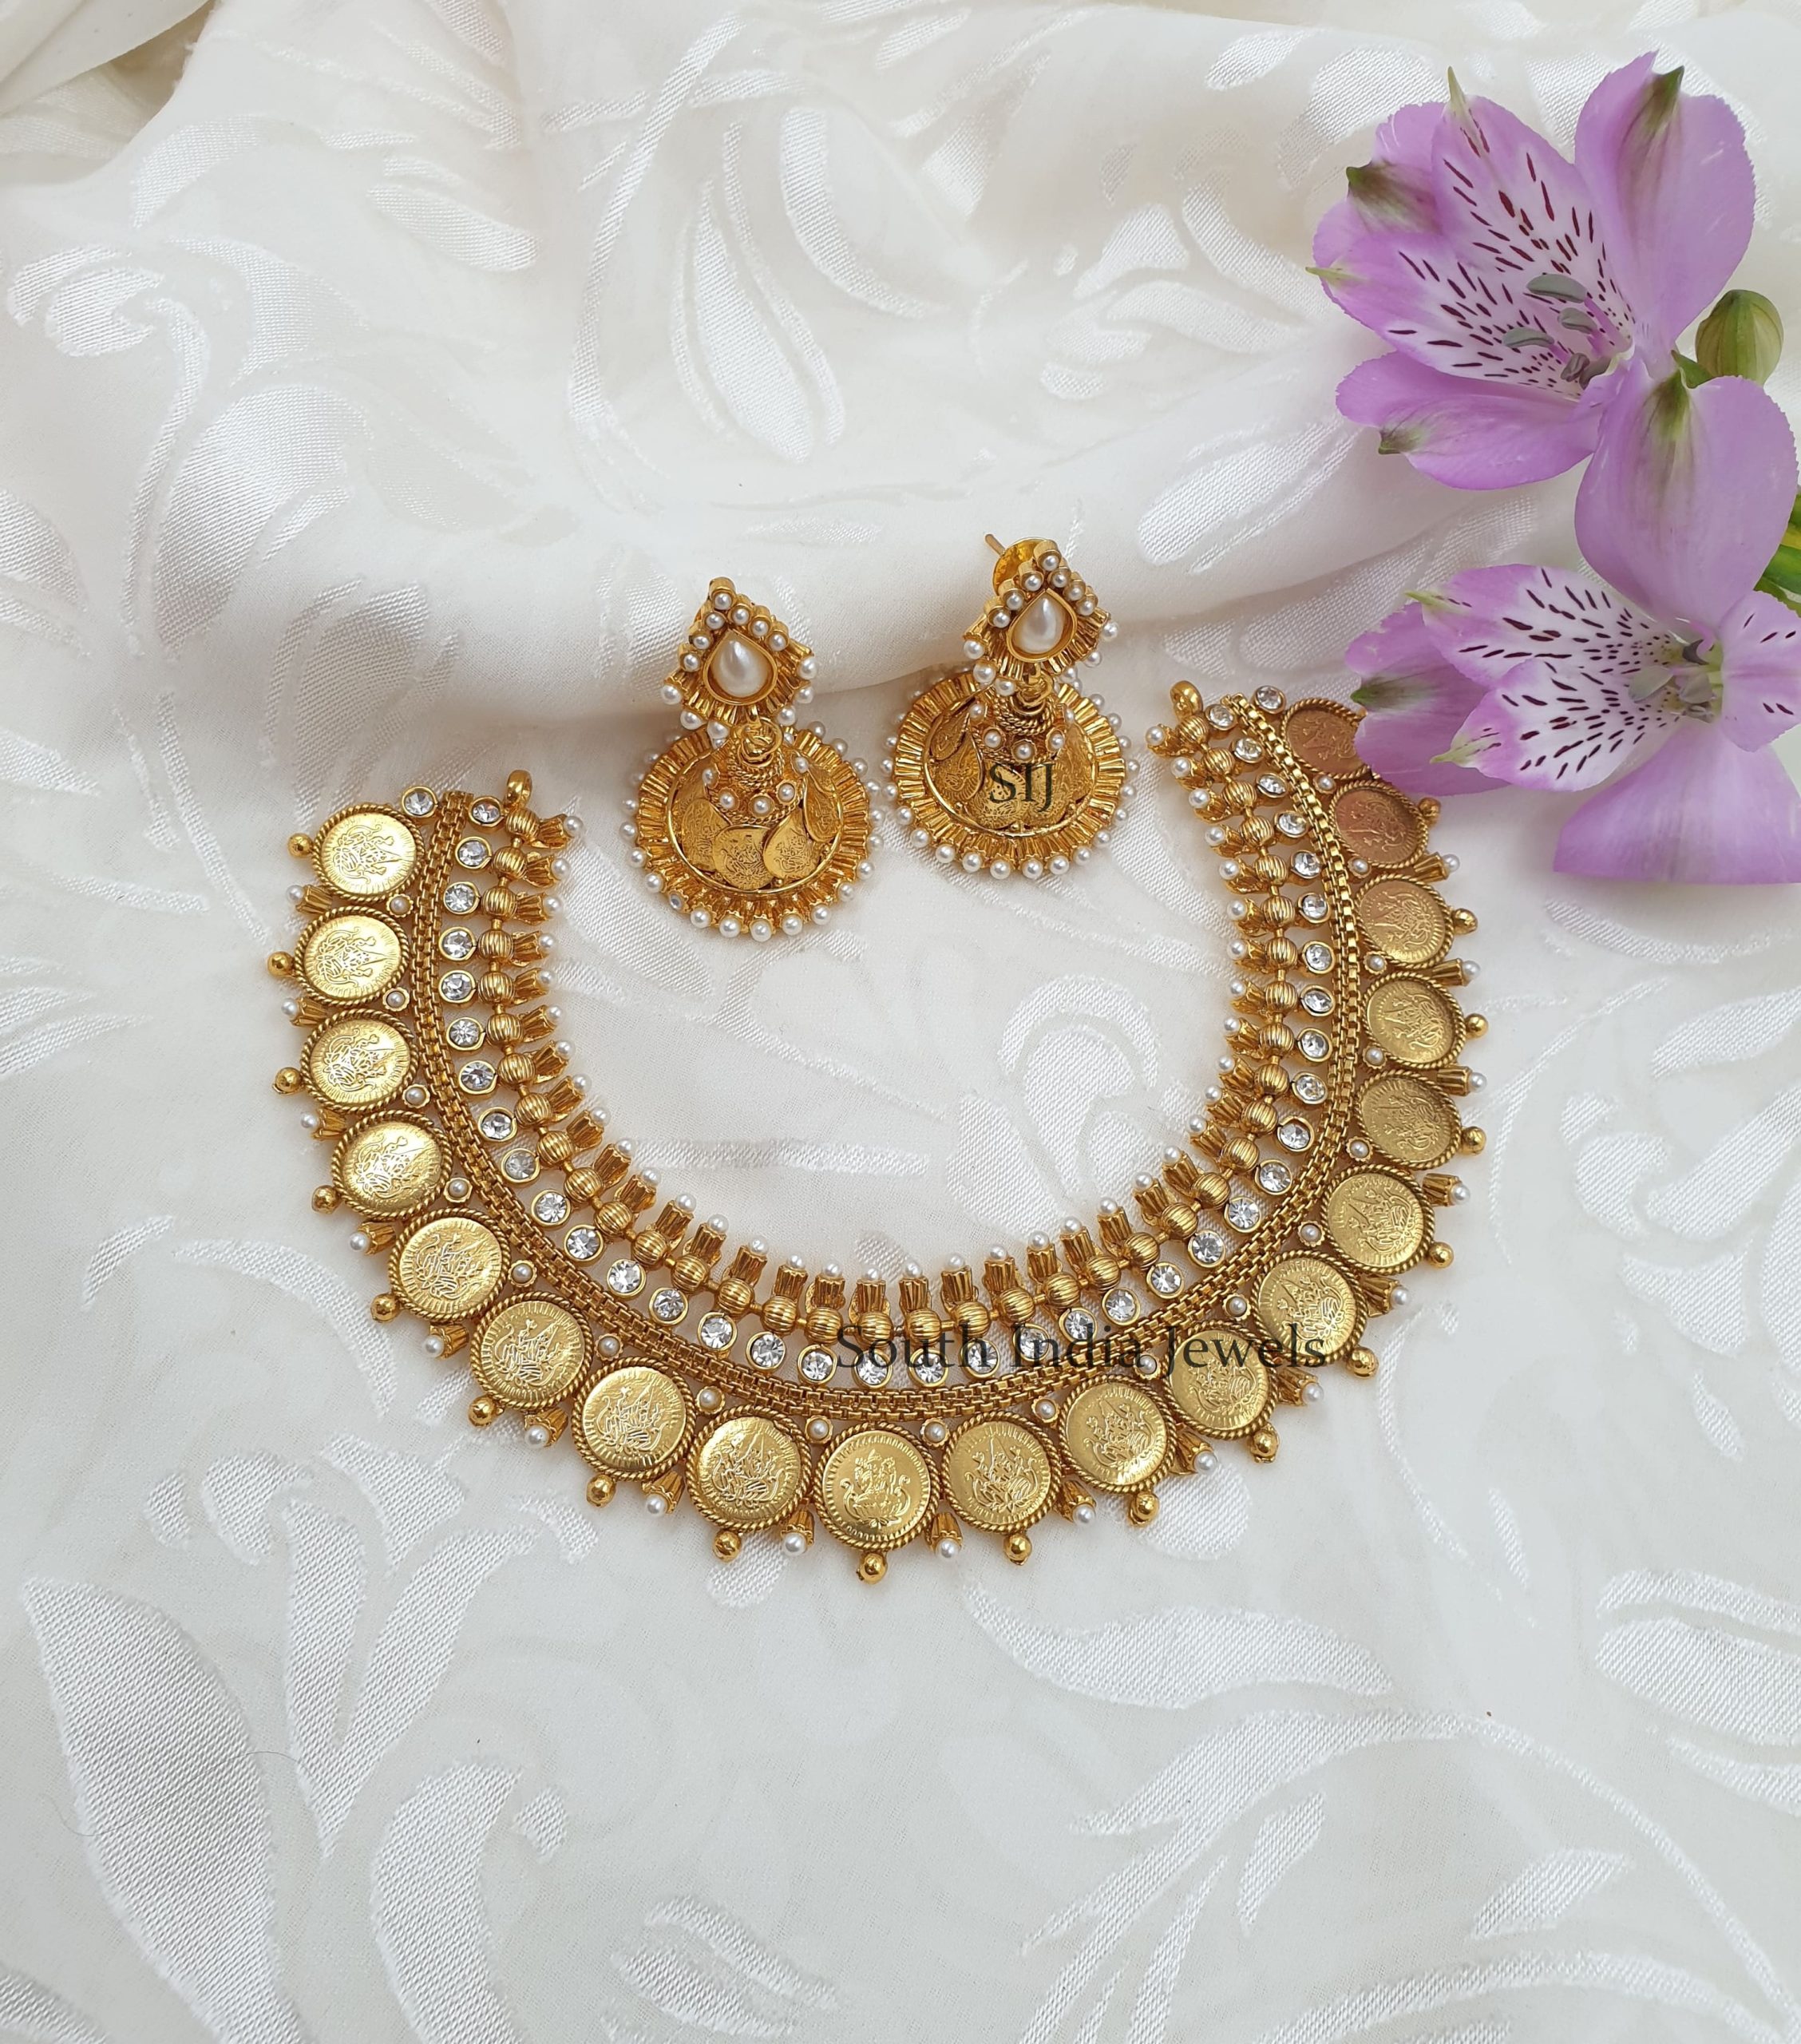 Stunning Lakshmi Coin Pearls Necklace